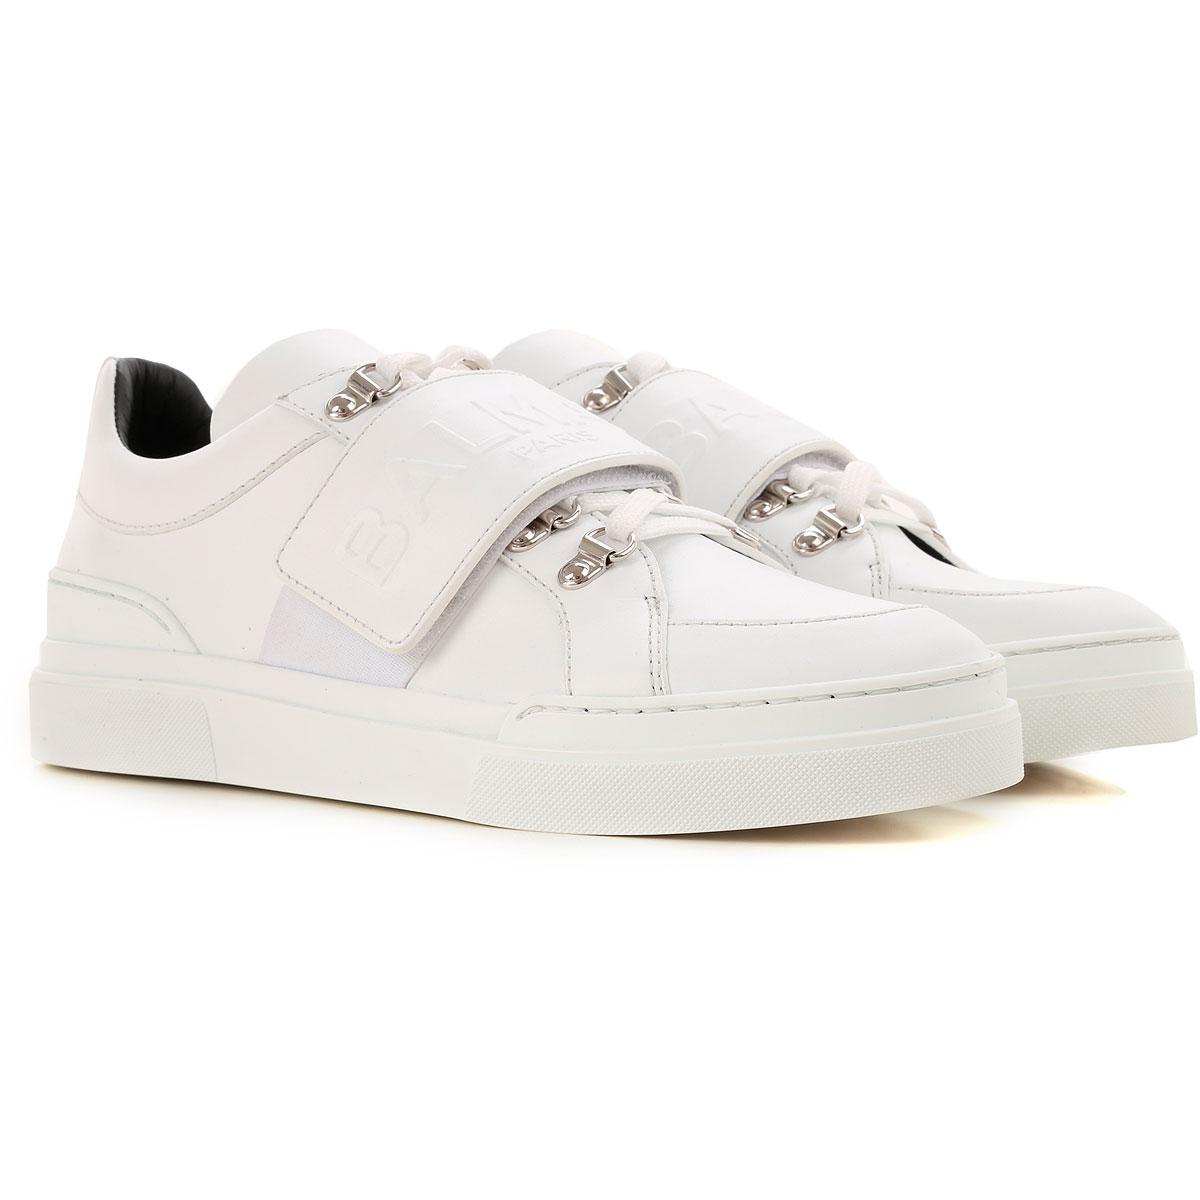 Balmain Leather Shoes For Men in White for Men - Save 78% - Lyst